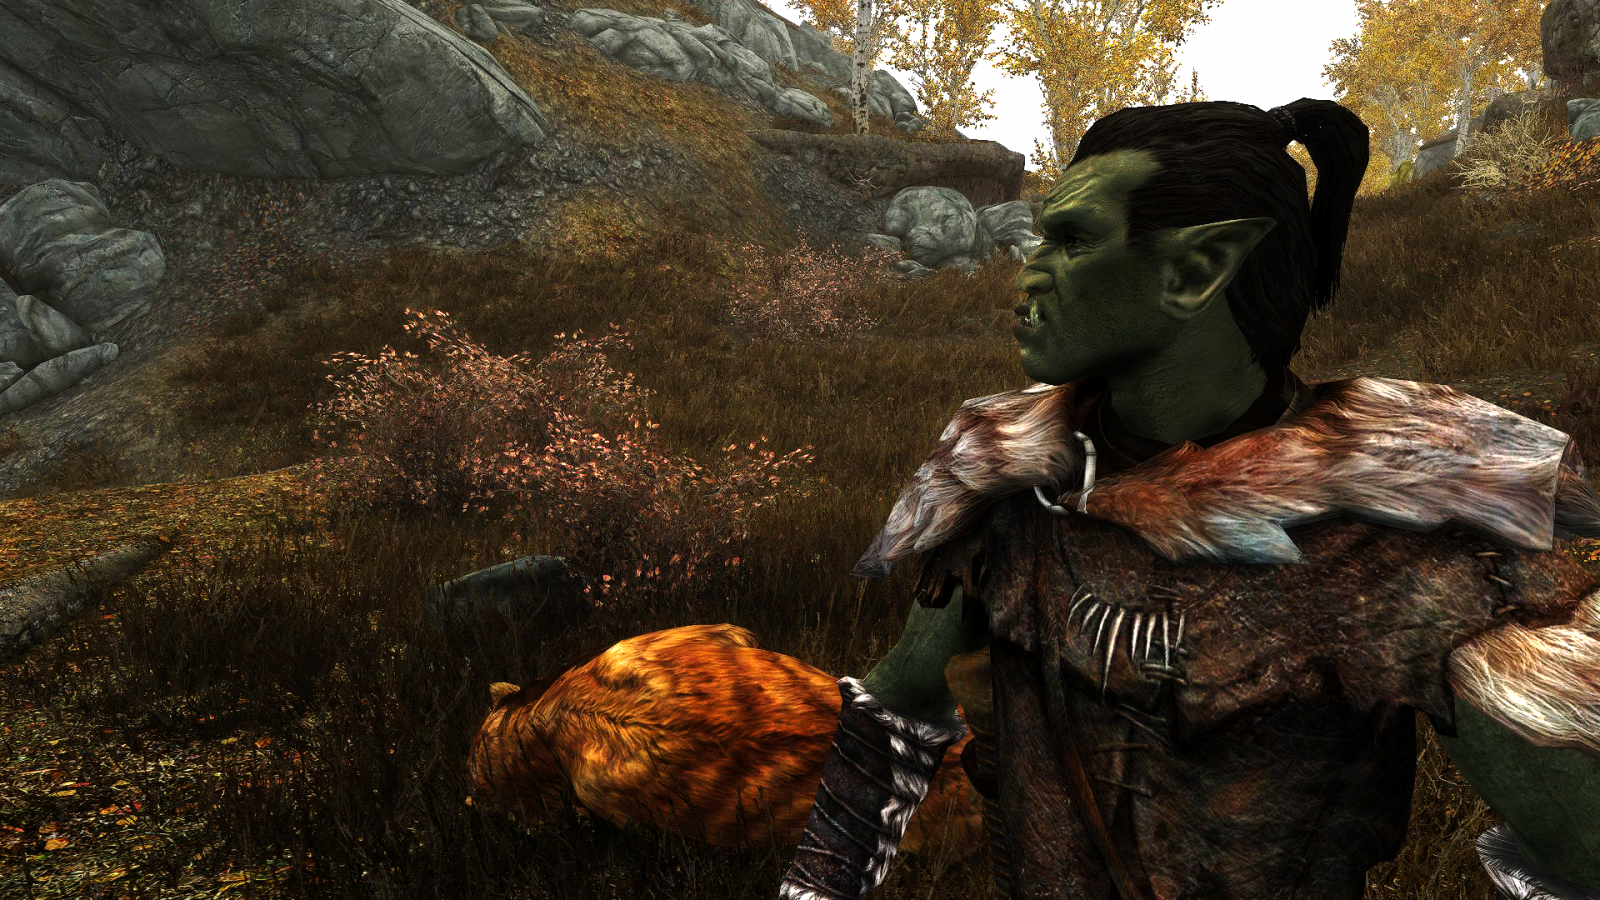 I asked the Orc what he was doing out there